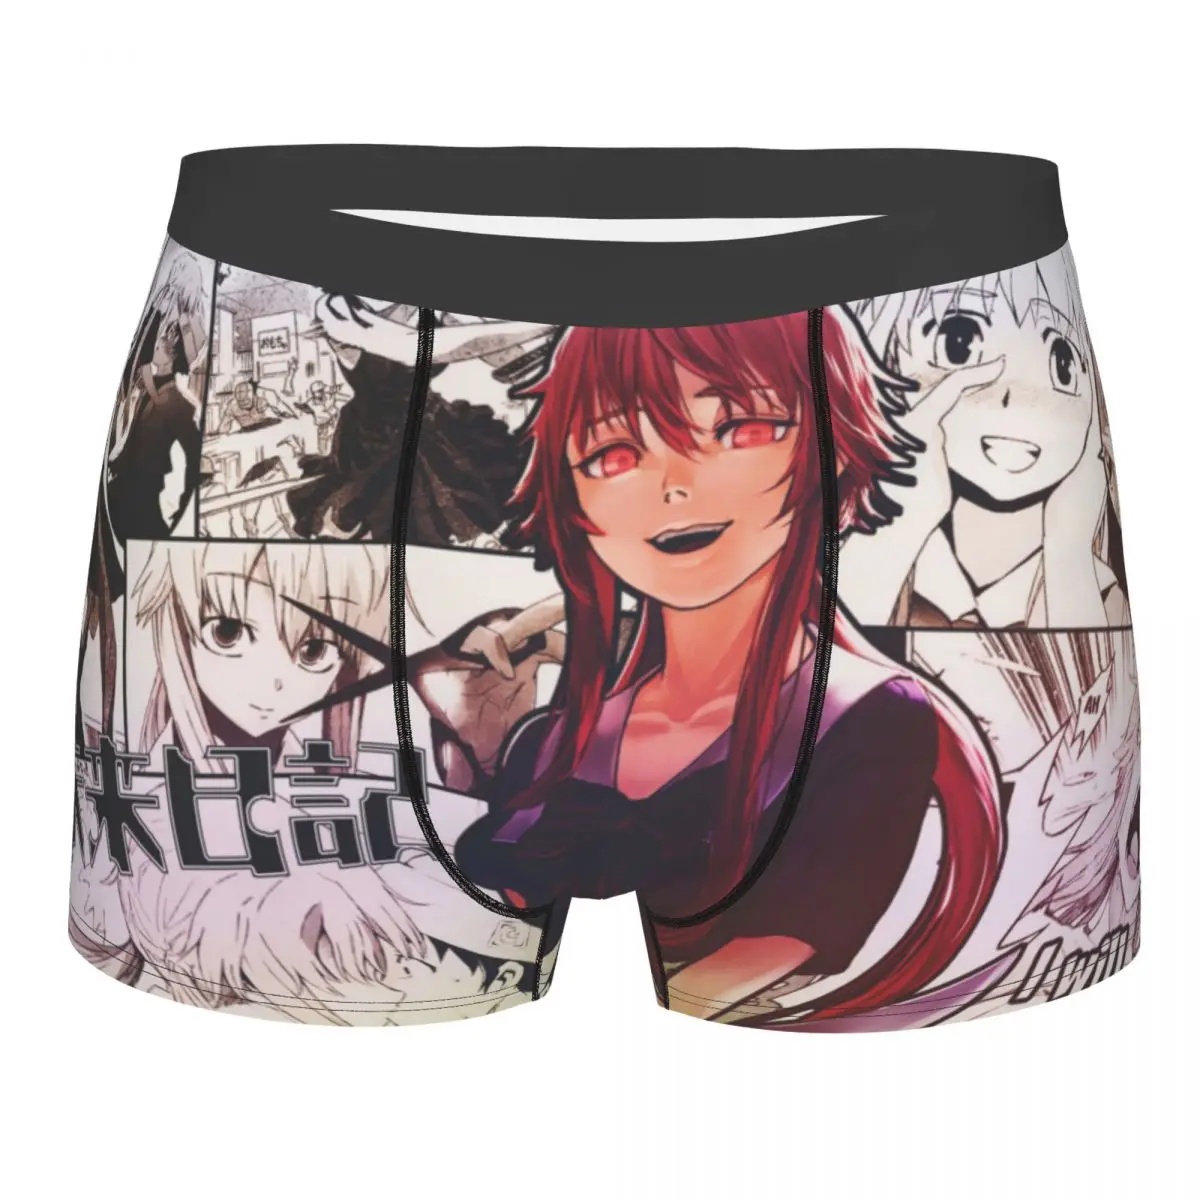 

Future Diary Yandere Man's Boxer Briefs Manga Cut Highly Breathable Underwear High Quality Print Shorts Gift Idea